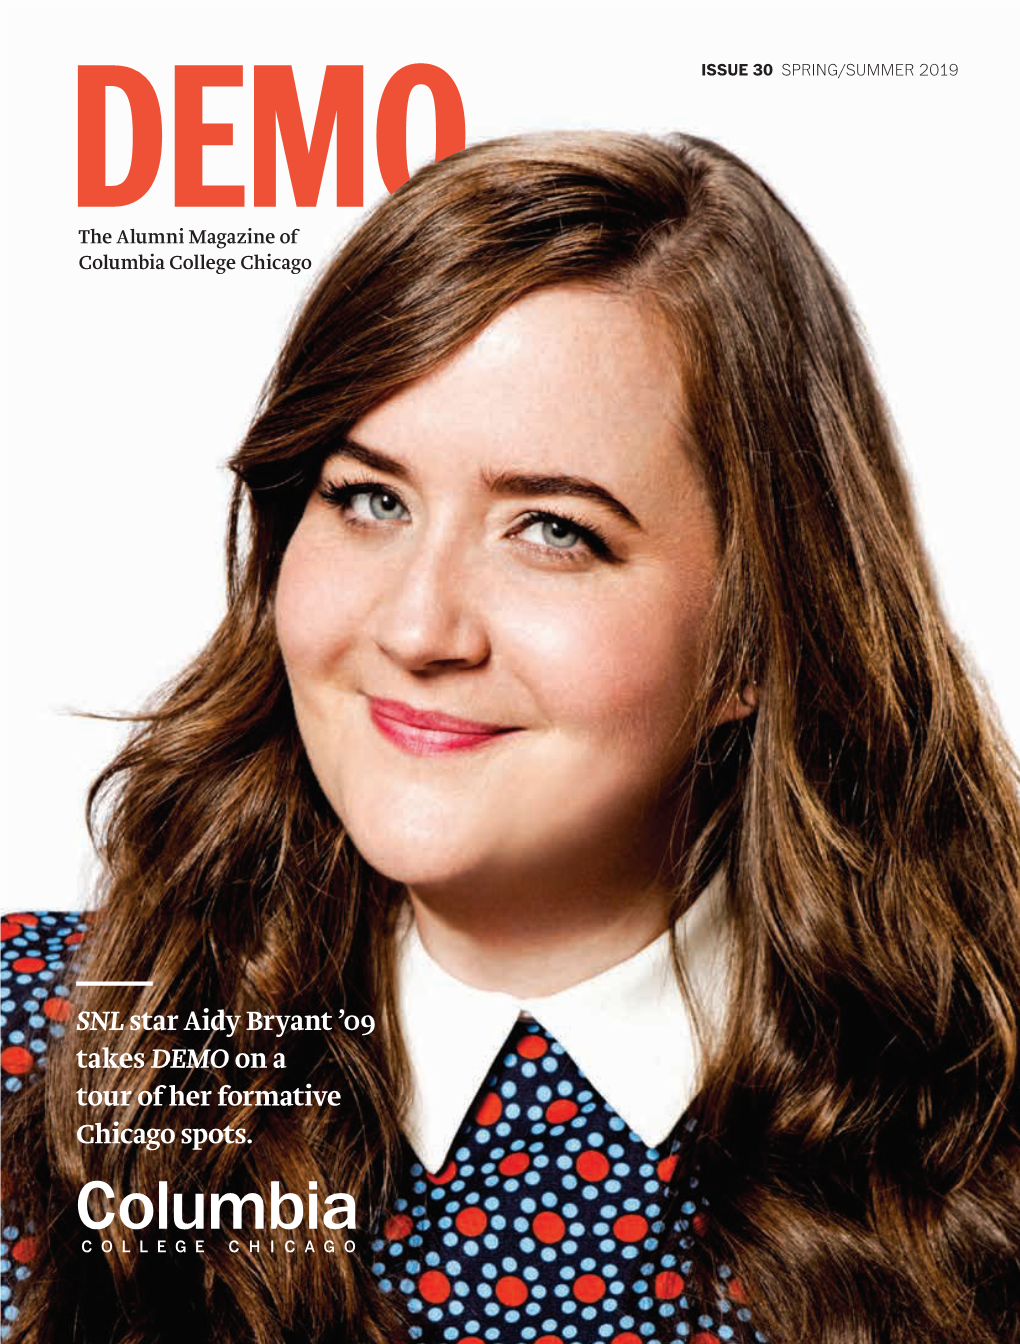 SNL Star Aidy Bryant '09 Takes DEMO on a Tour of Her Formative Chicago Spots